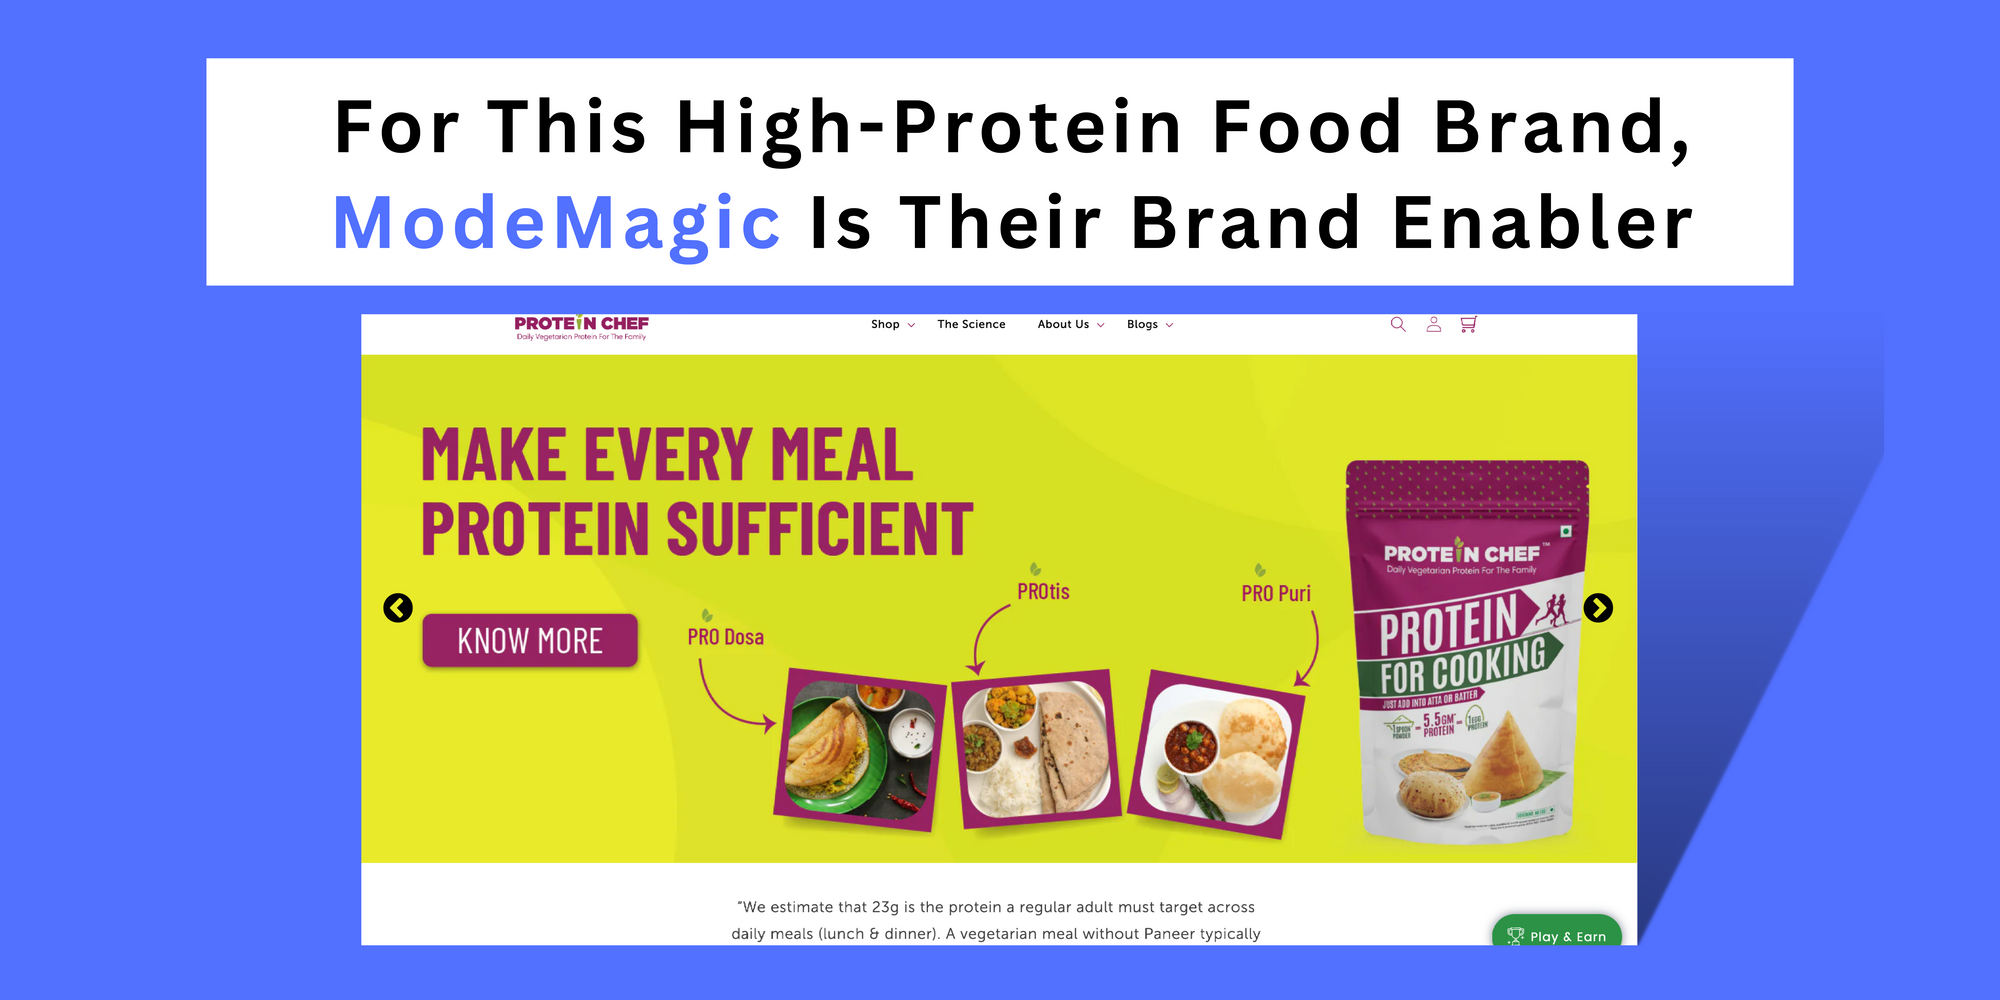 For This High-Protein Food Brand, ModeMagic Is Their Brand Enabler